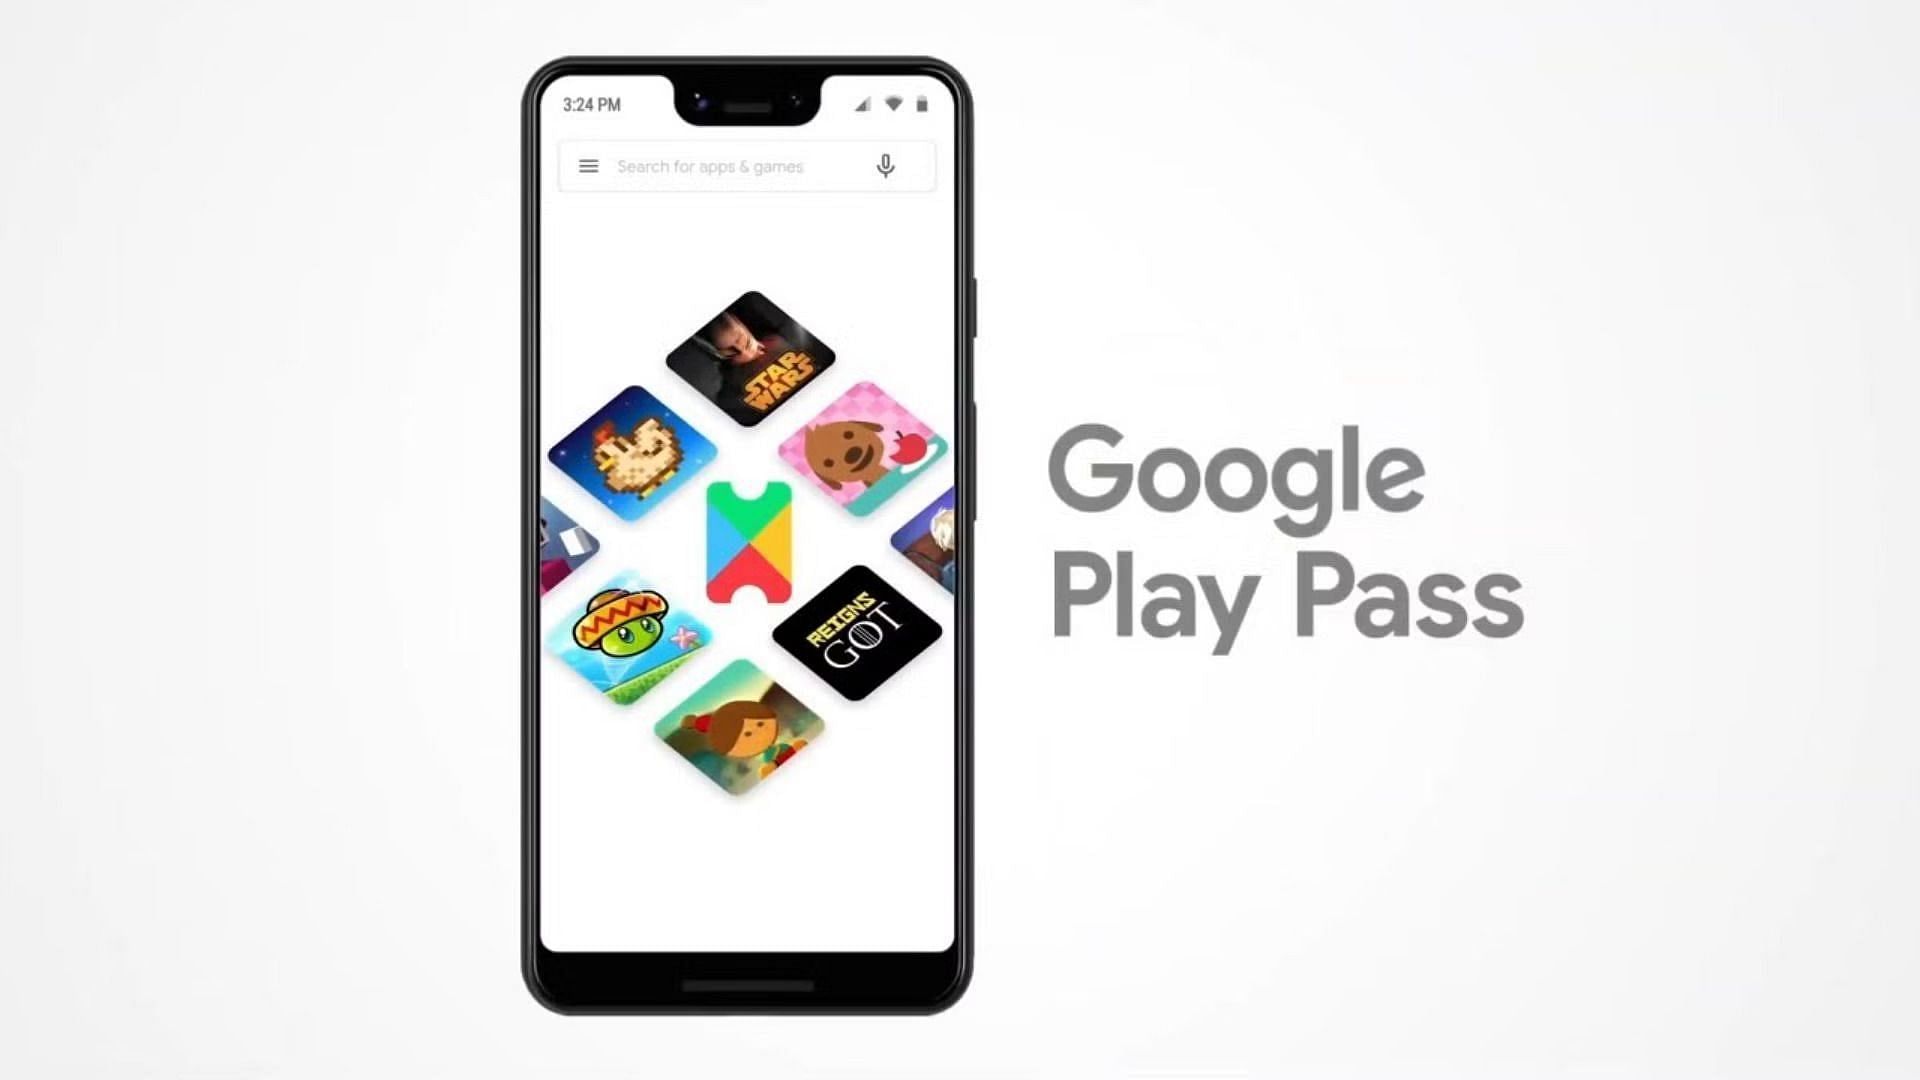 Google Play Pass is a subscription-based service that can be enjoyed on android devices.(Image via Google) via 